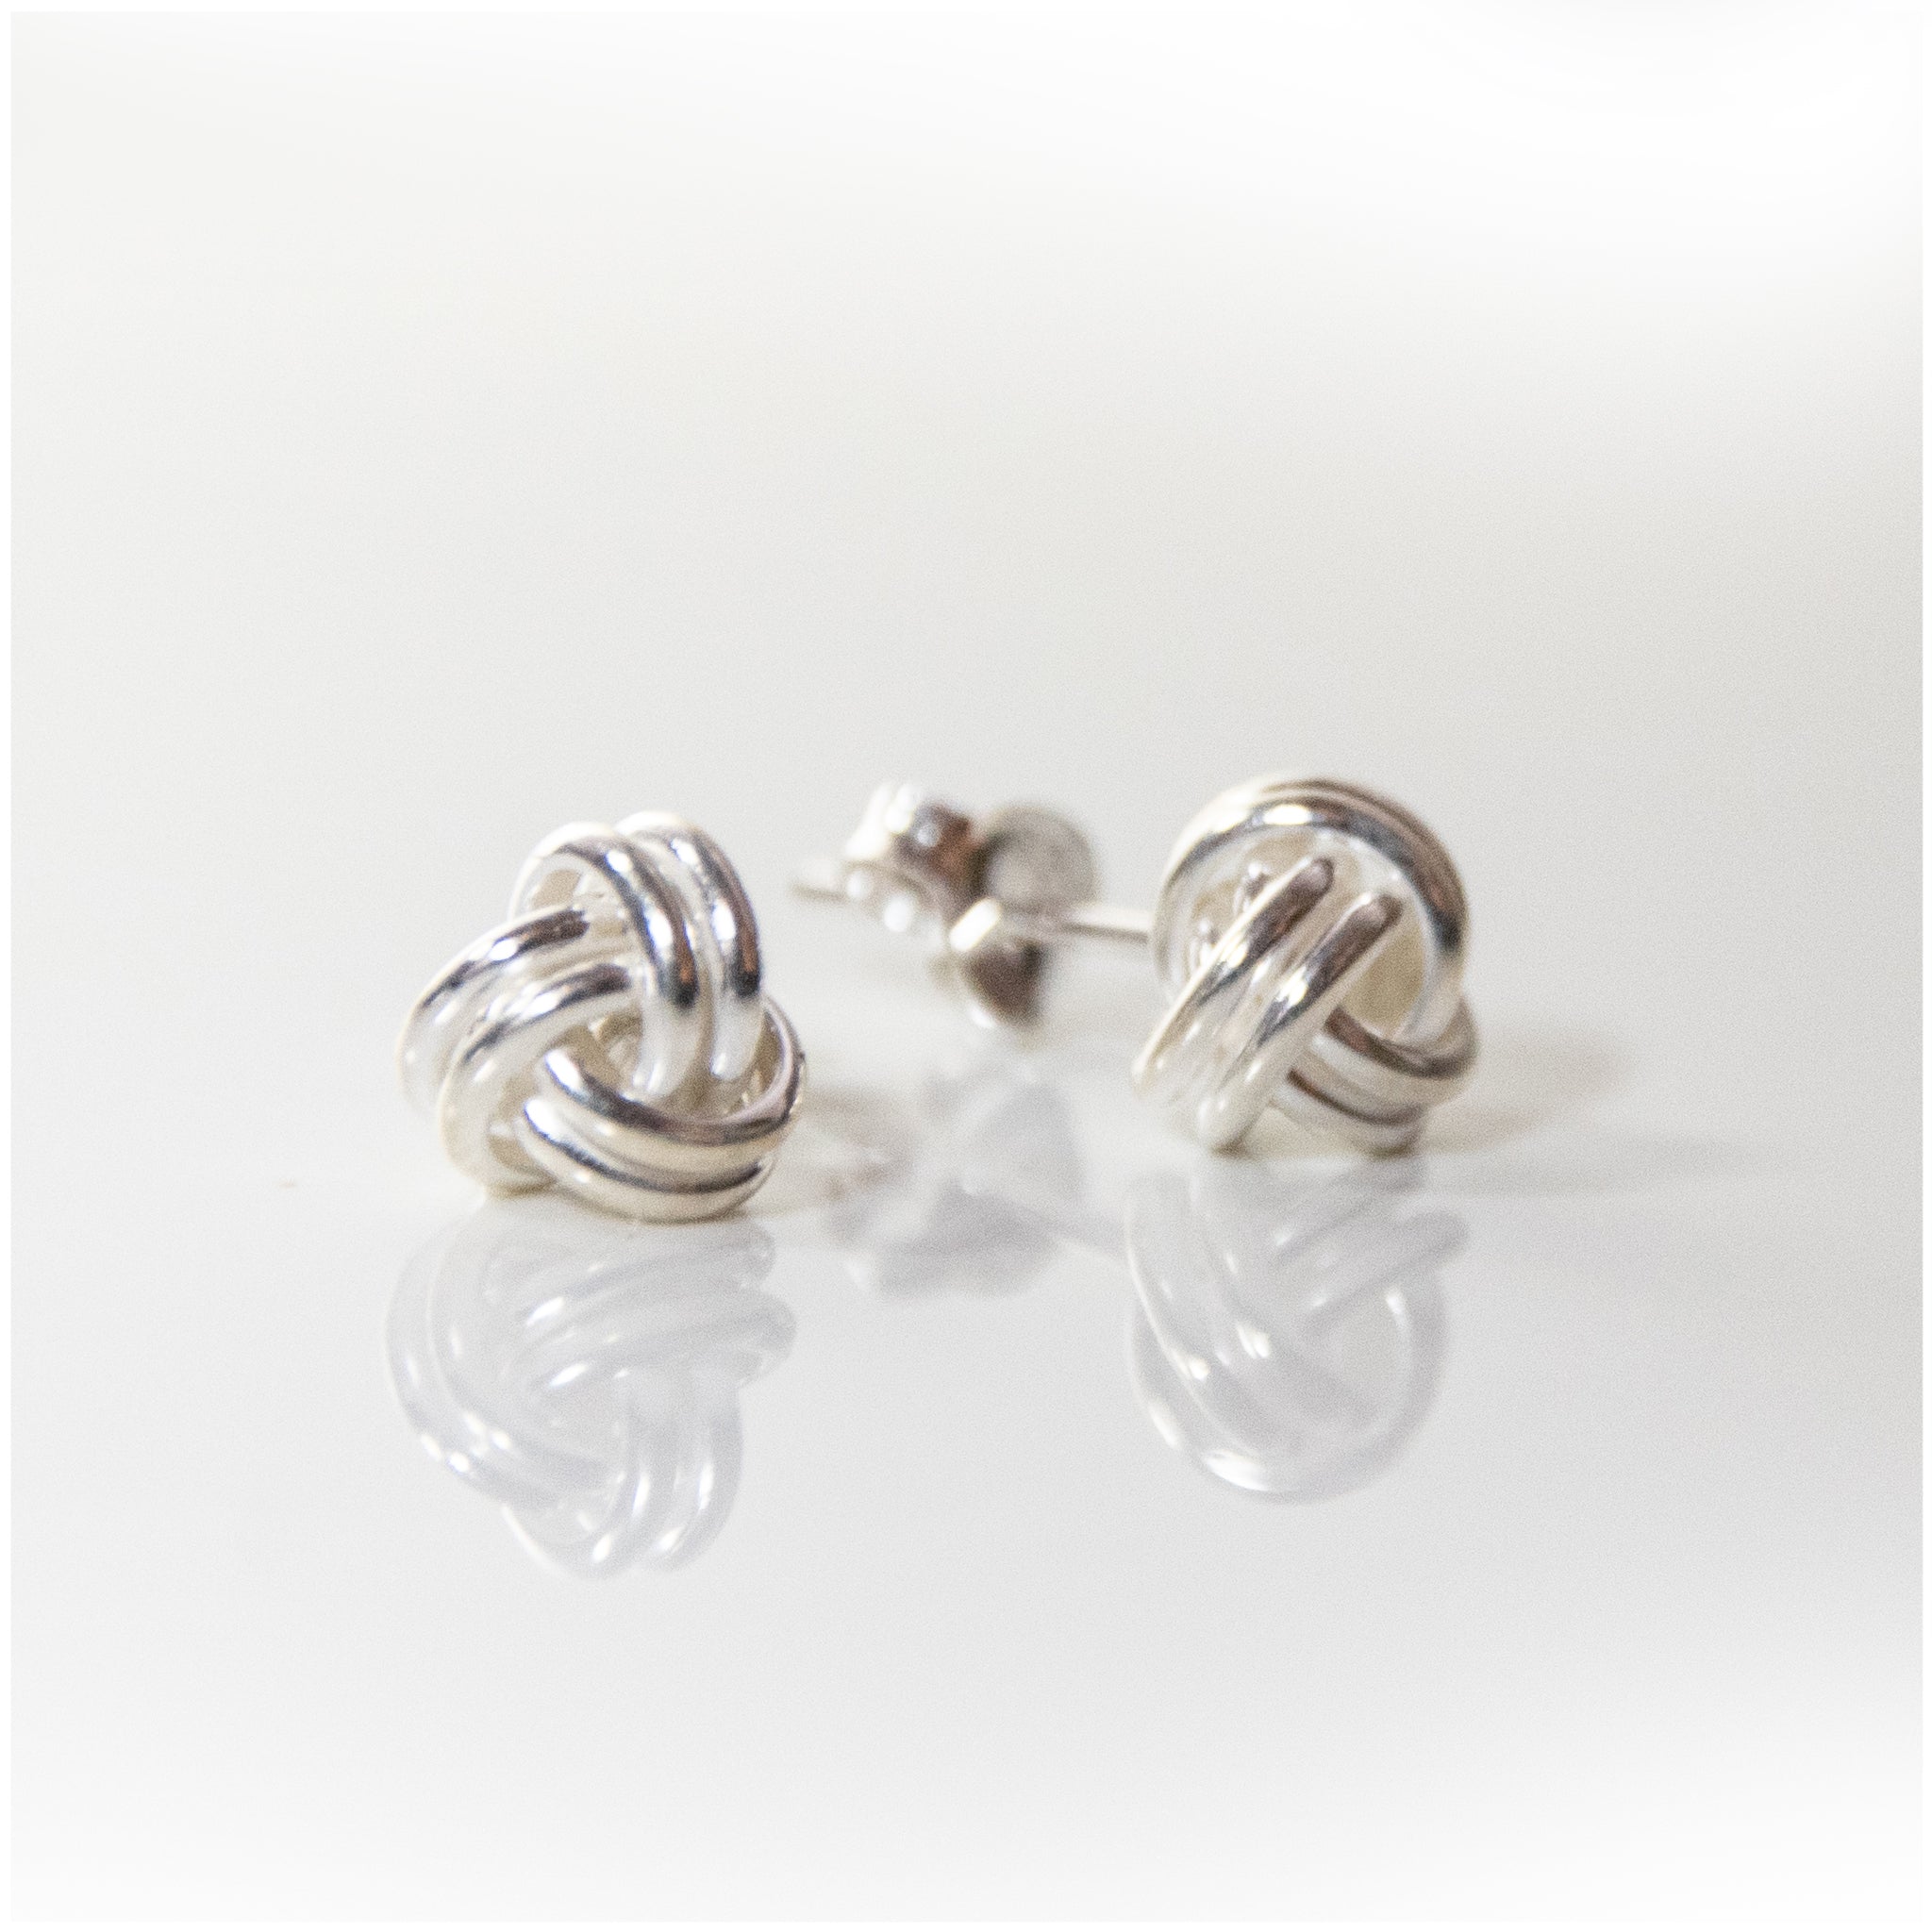 ES020 - Sterling Silver Knotted Earrings